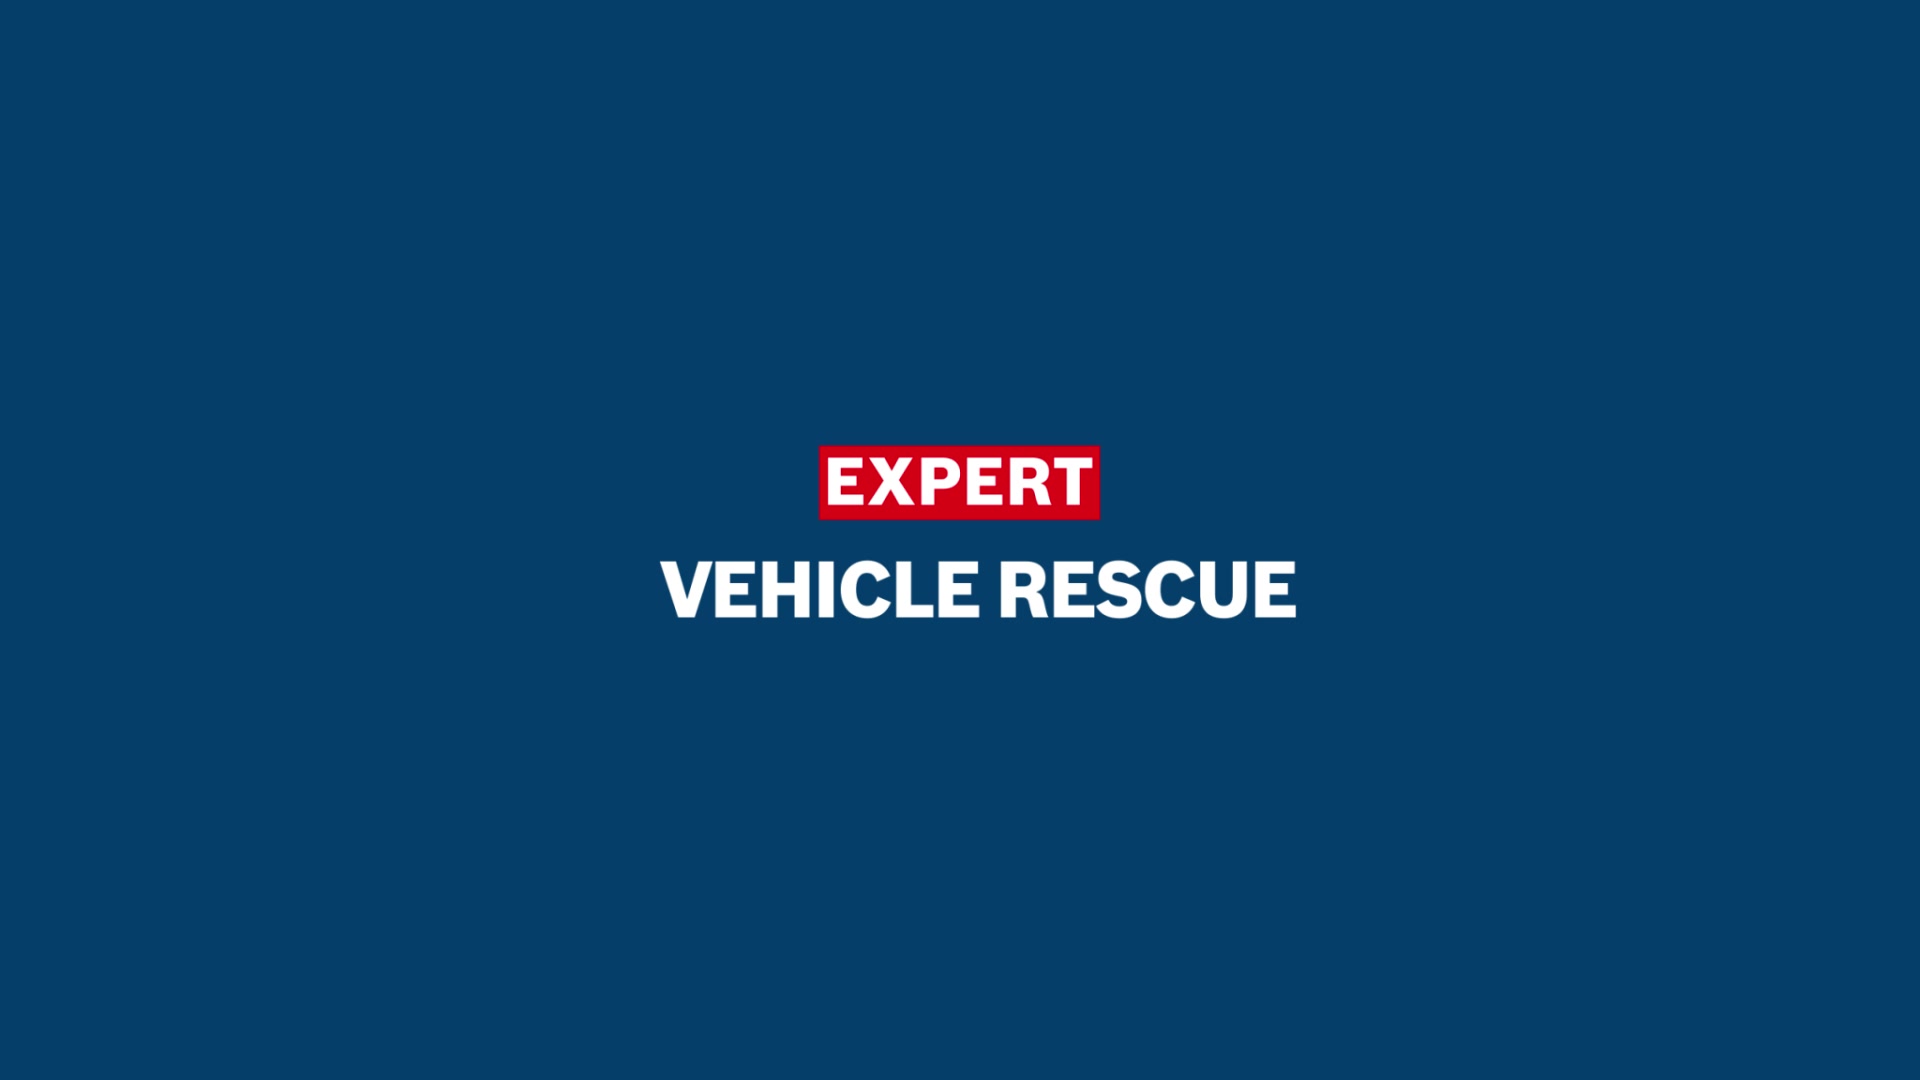 EXPERT ‘Vehicle Rescue’